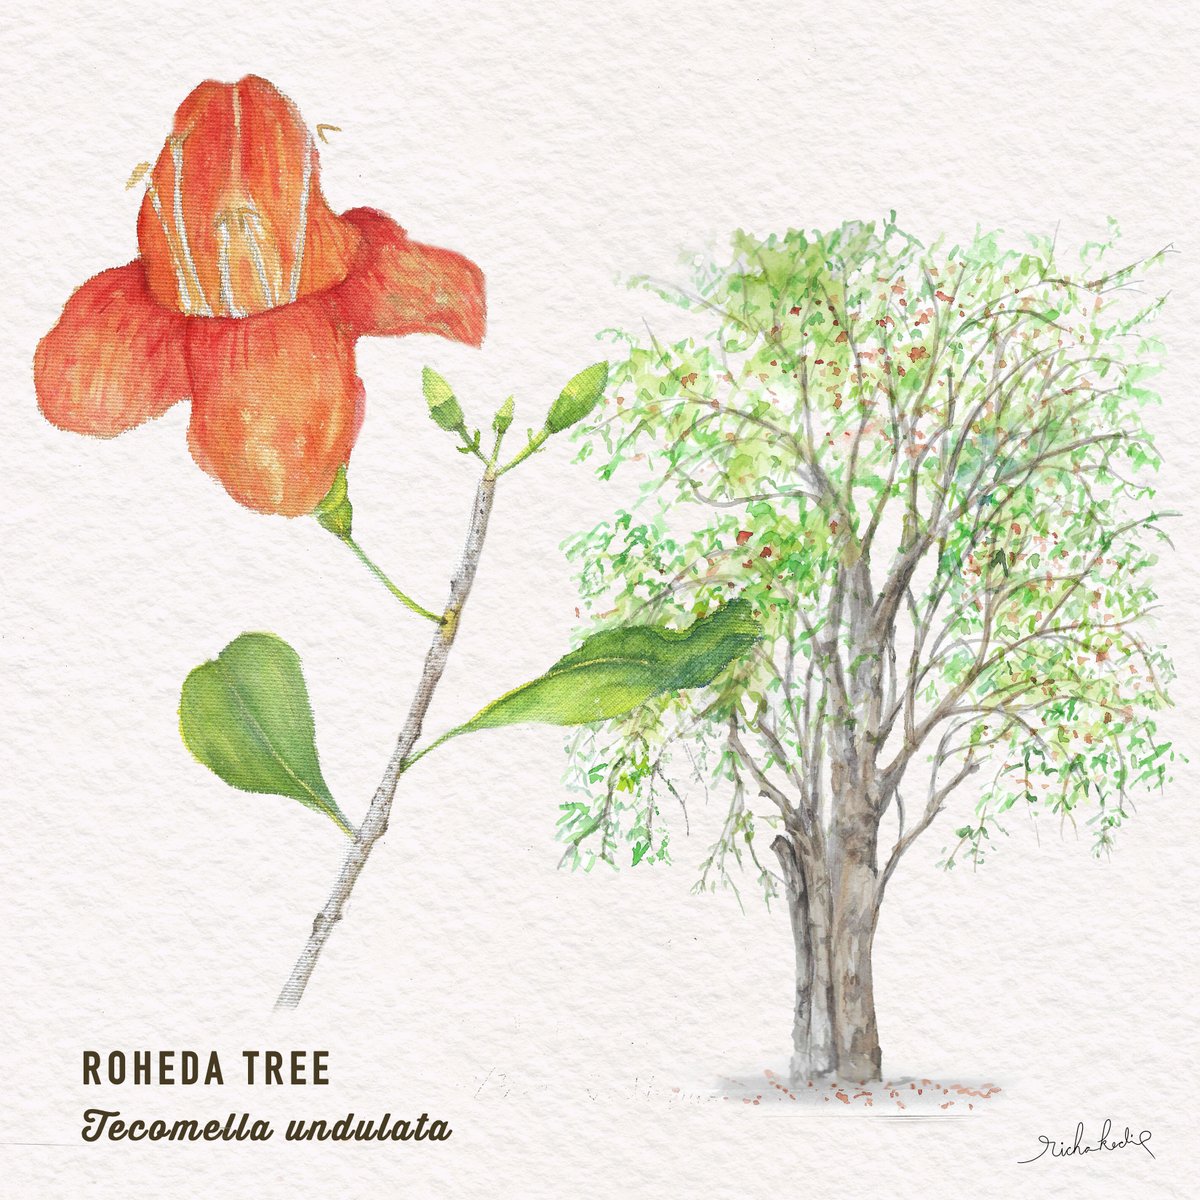 Roheda Tree (Tecomella undulata) is the state flower of Rajasthan but you have to brave the heat to see it flowering in spring/ early summer. #rajasthan #stateflower #treesofindia #botanicalartist #aravalivegetation #sagaoftrees #coloursofnature #desertlife